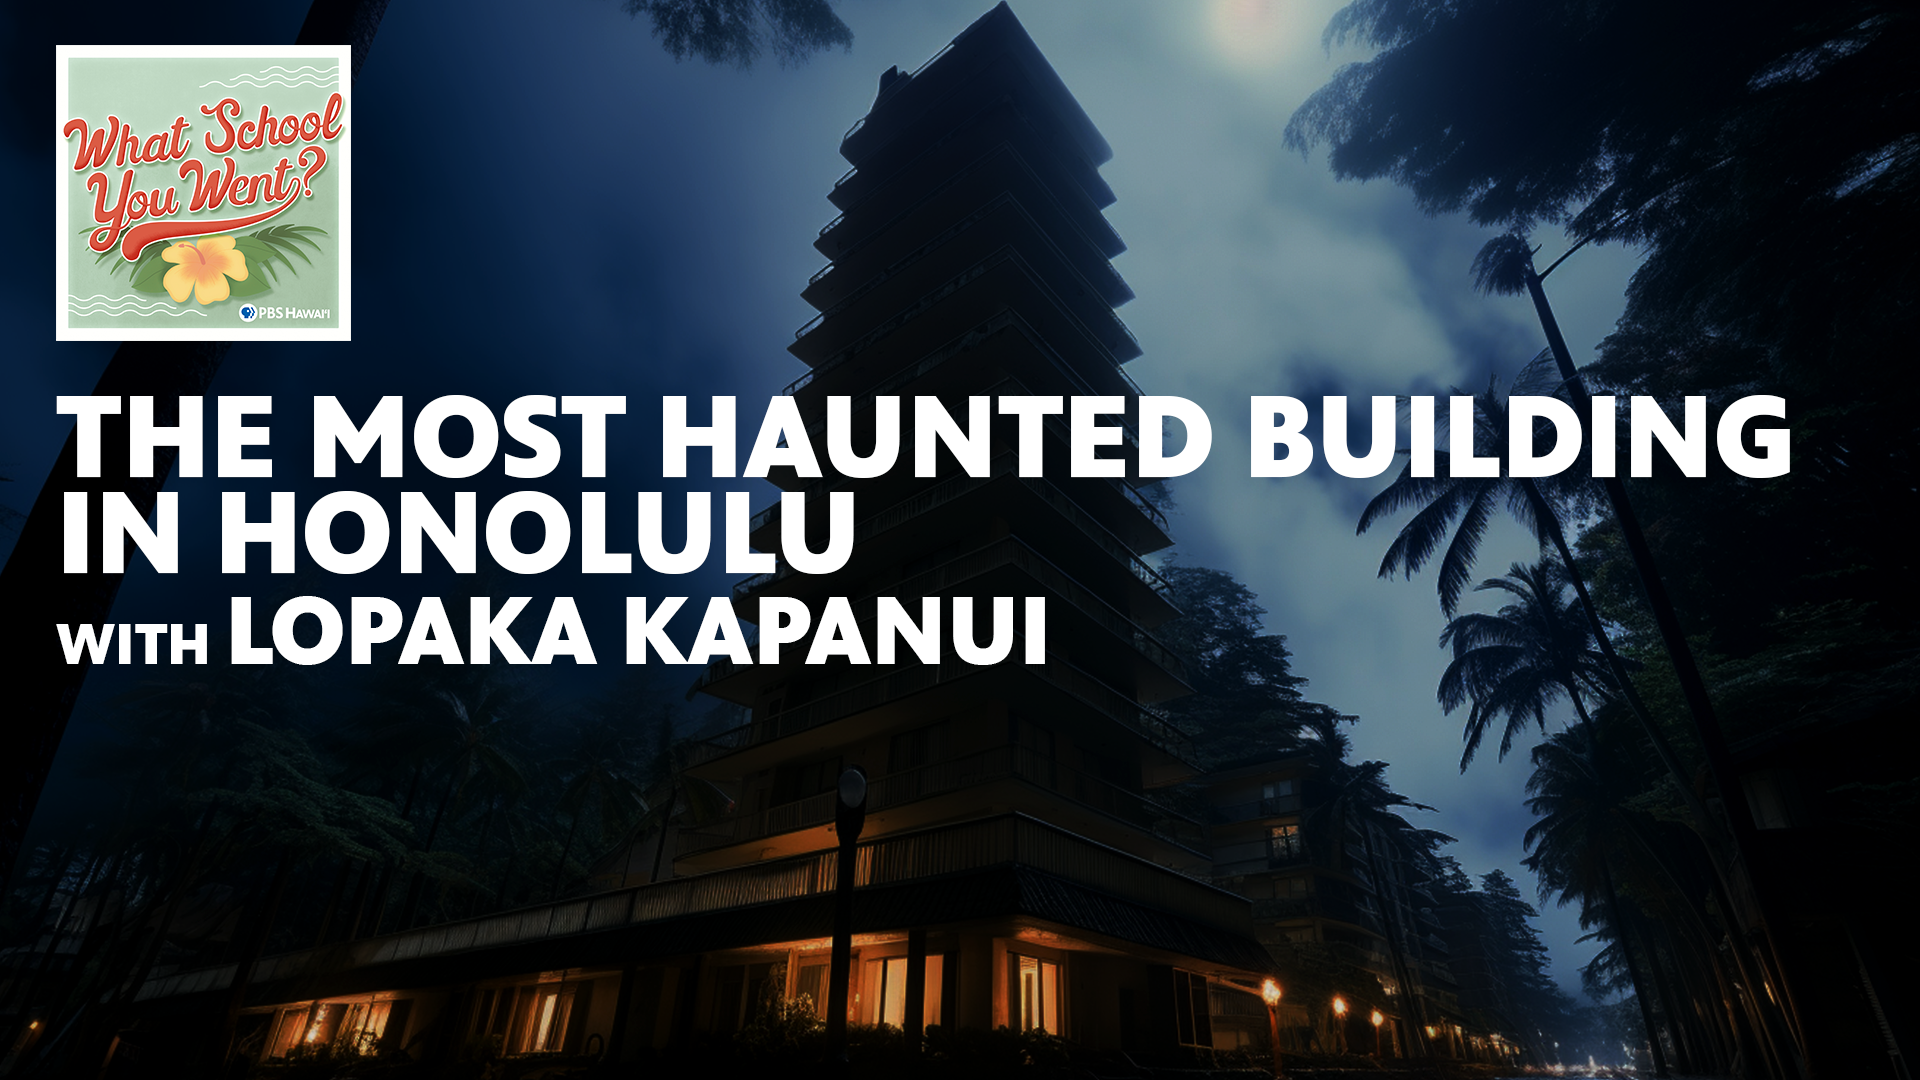 THE MOST HAUNTED BUILDING IN HONOLULU  <br/>with Lopaka Kapanui